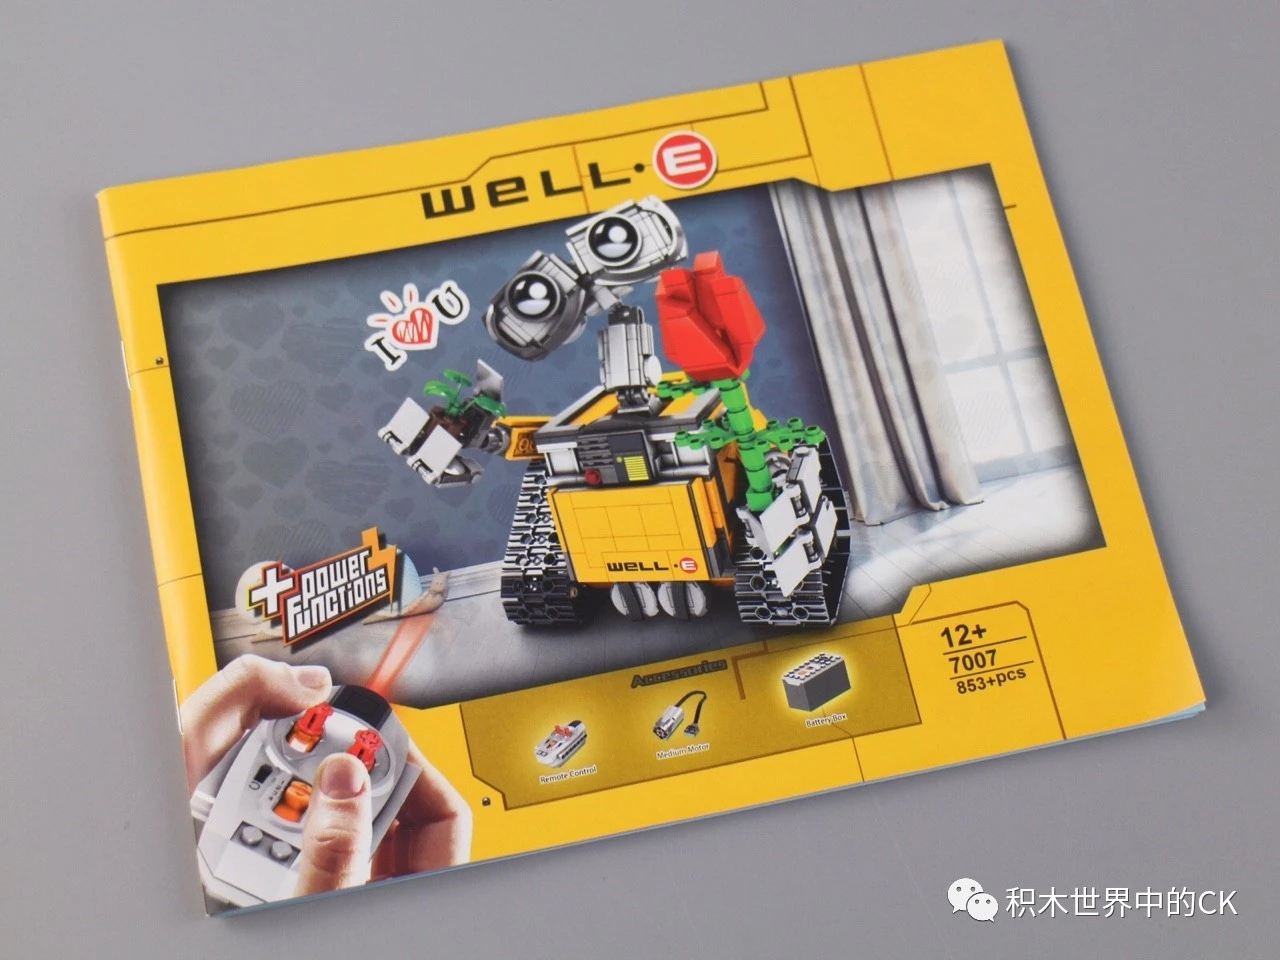 Review Of Sy7007 Wall E Motorized Clone Of Lego Ideas 21303 Customize Minifigures Intelligence